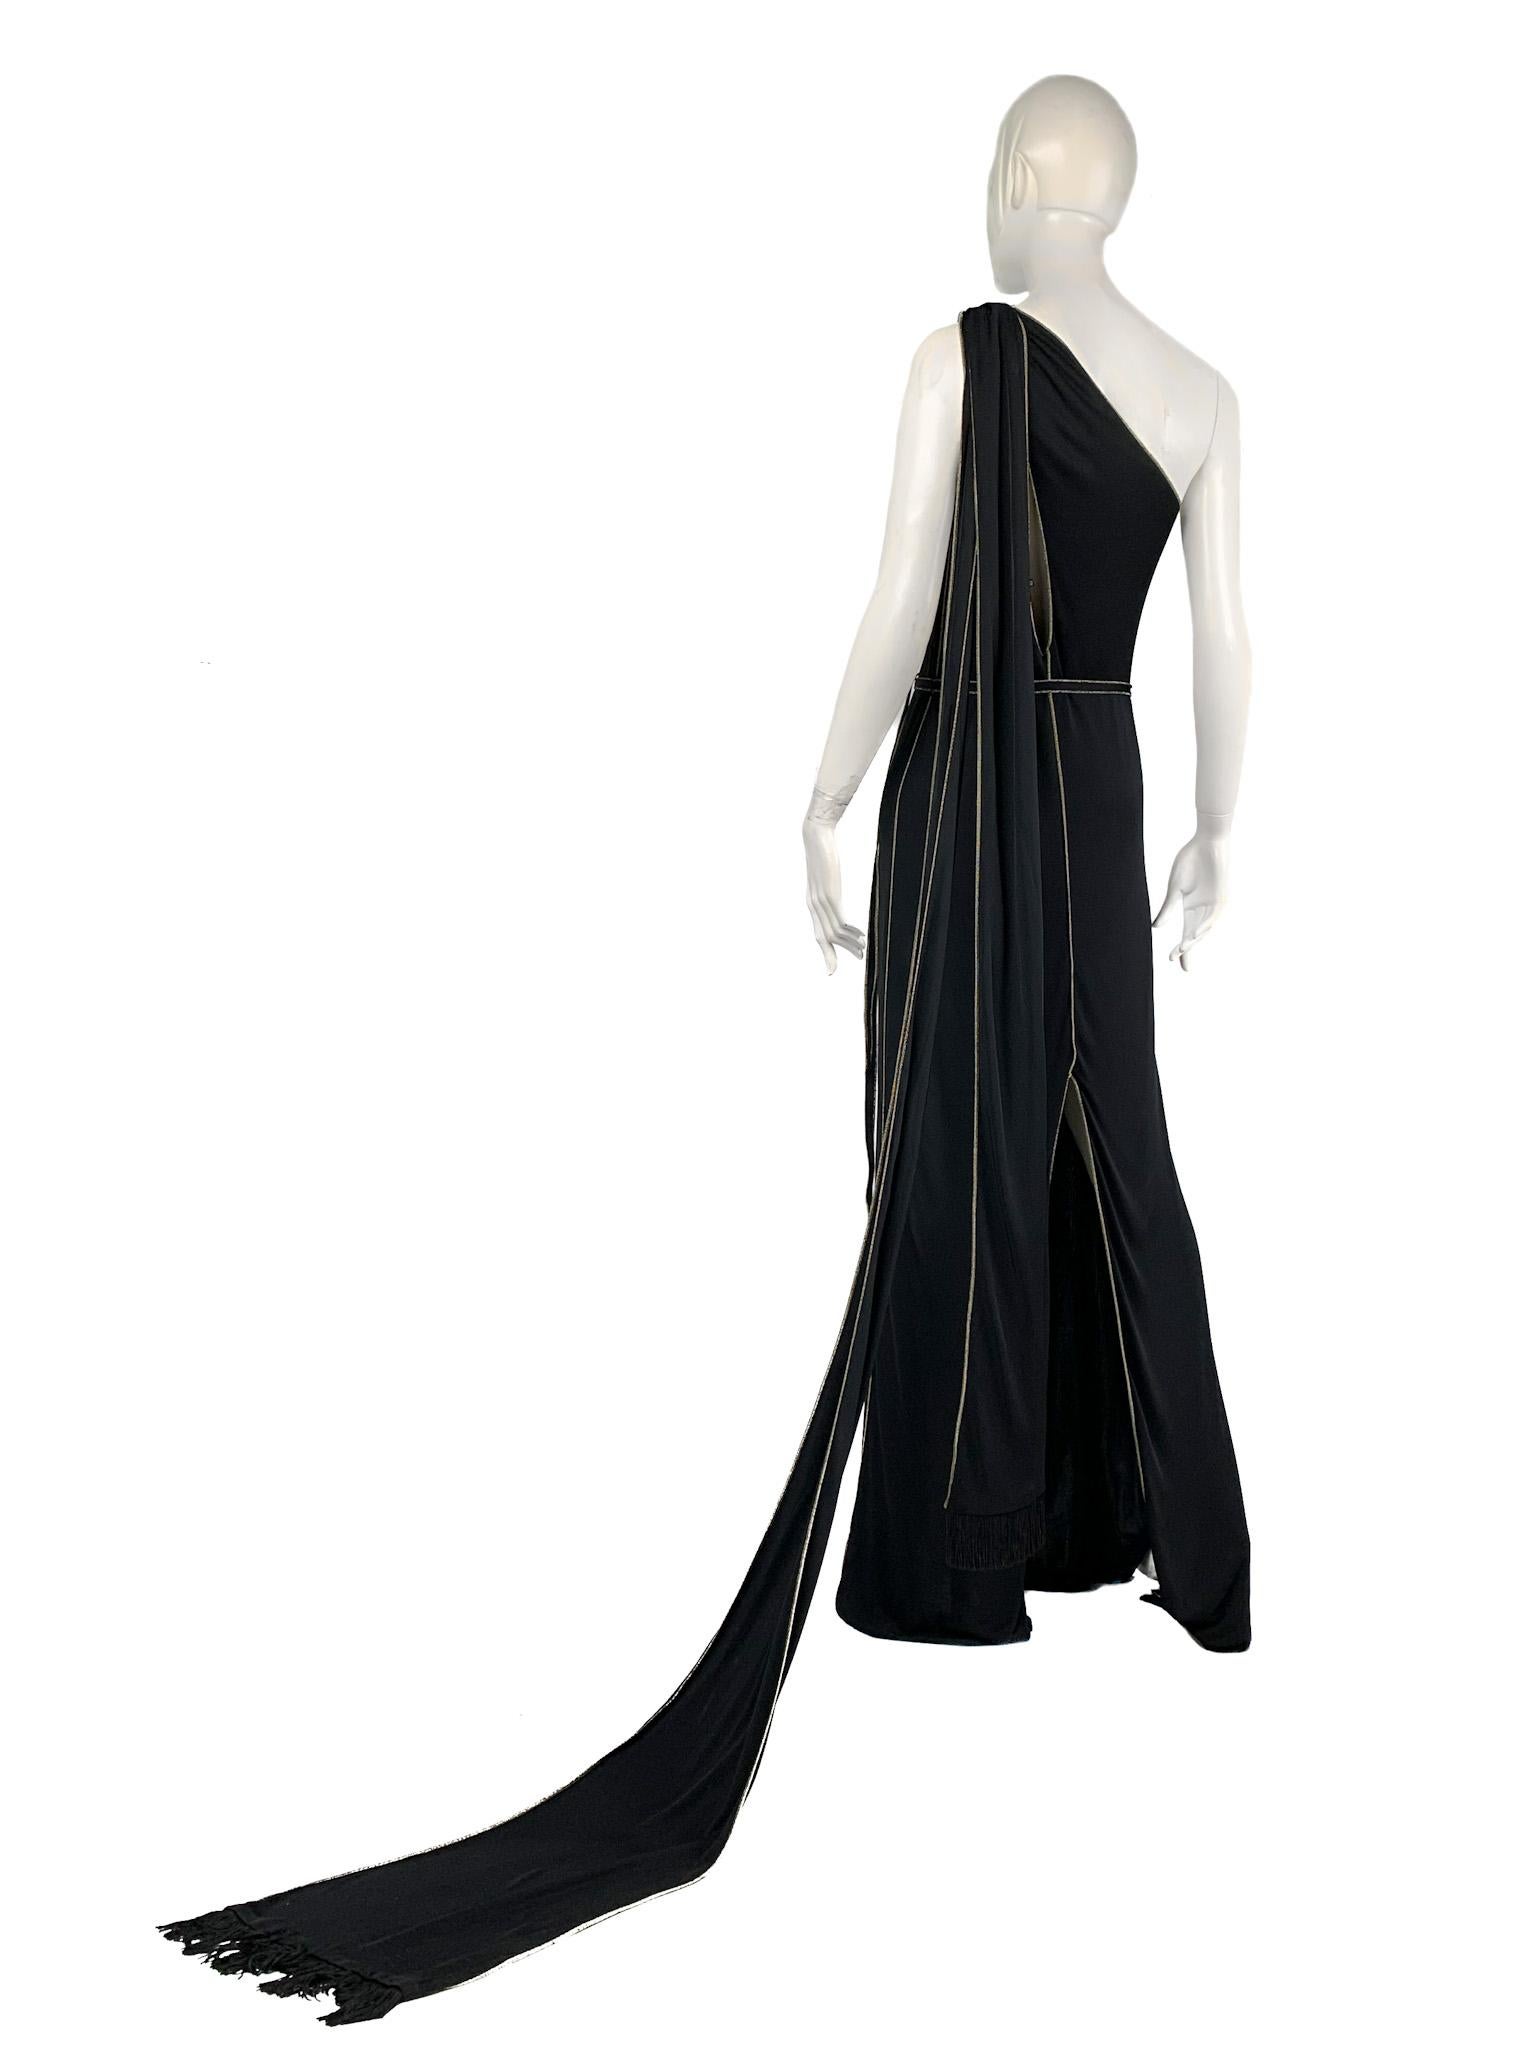 Gucci 2006 One-Shoulder Gown with Fringed Scarves/Train, Cutouts, Gold Topstitch 2